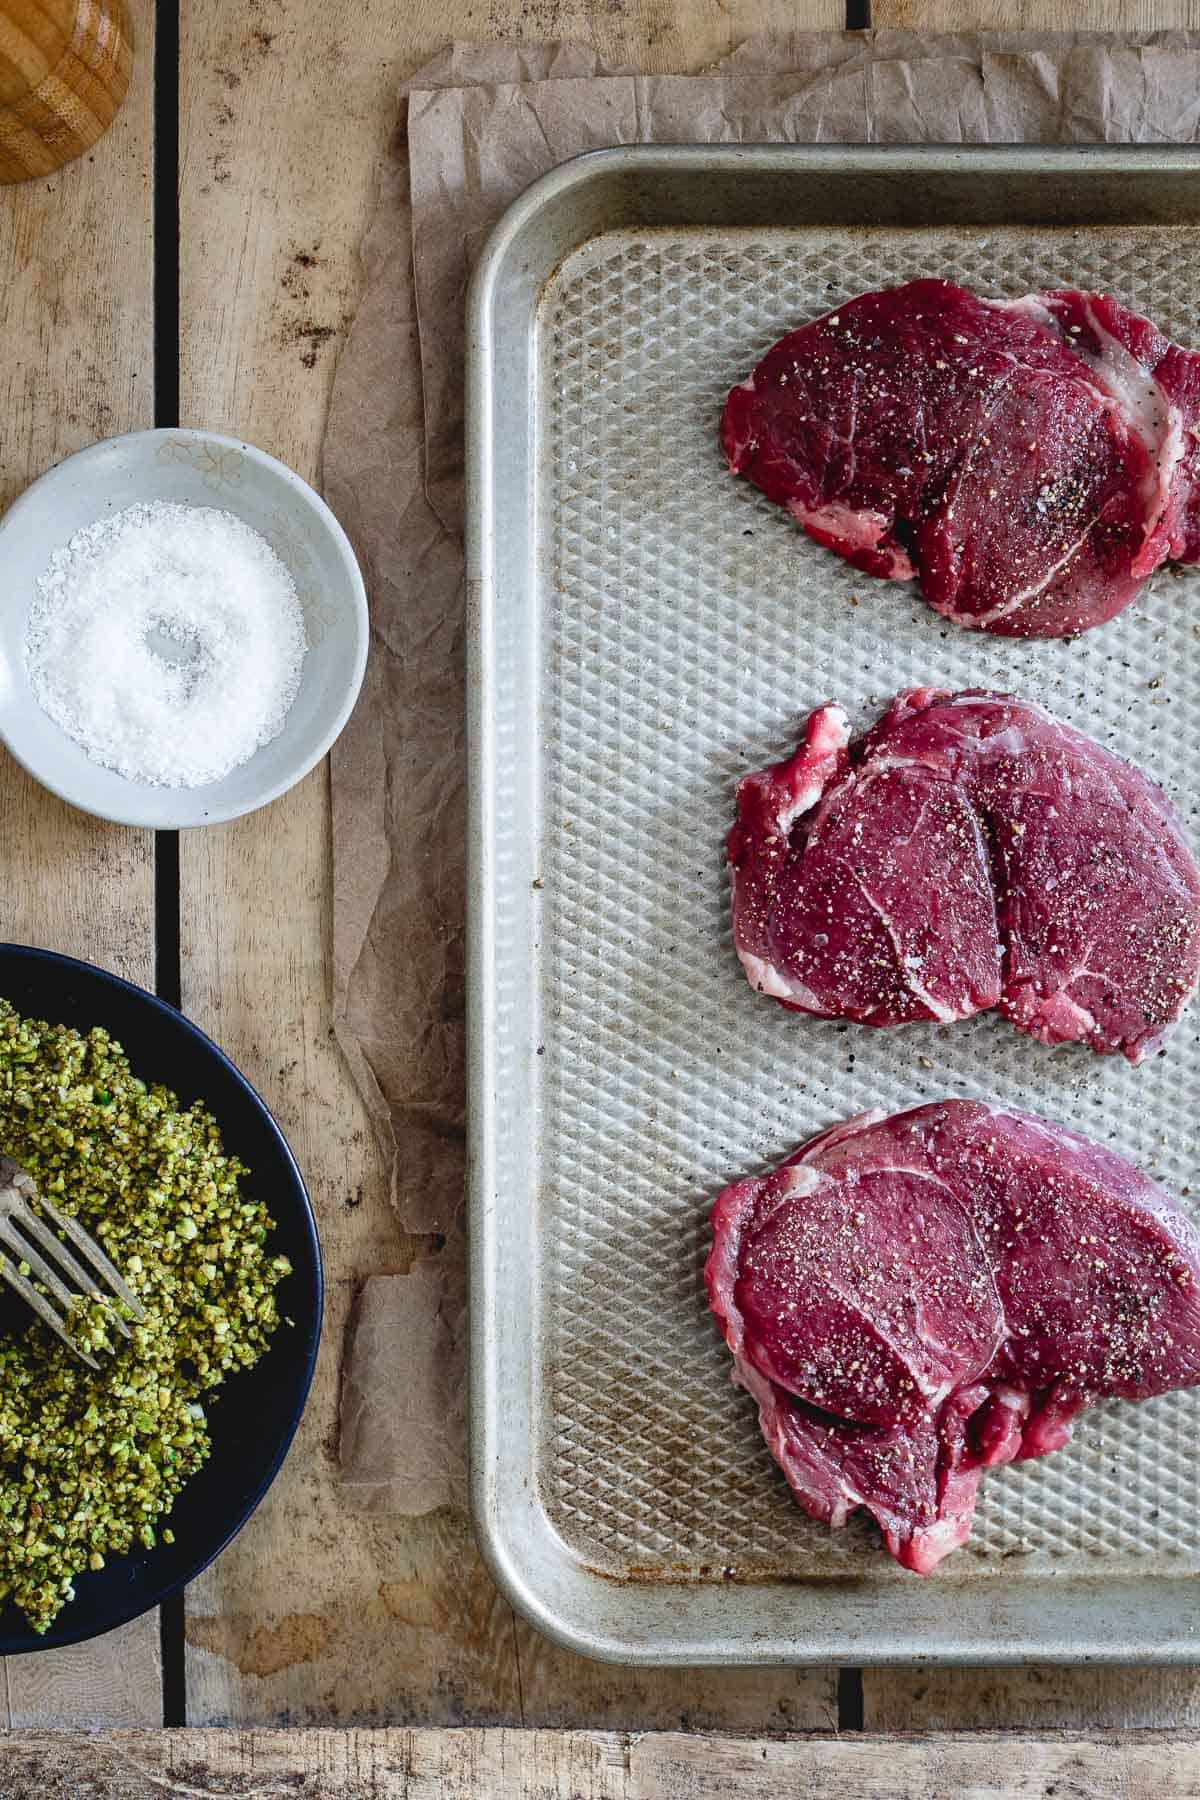 Sirloin lamb chops are coated in a pistachio crust and topped with red wine cherries for the ultimate Valentine's Day dinner.